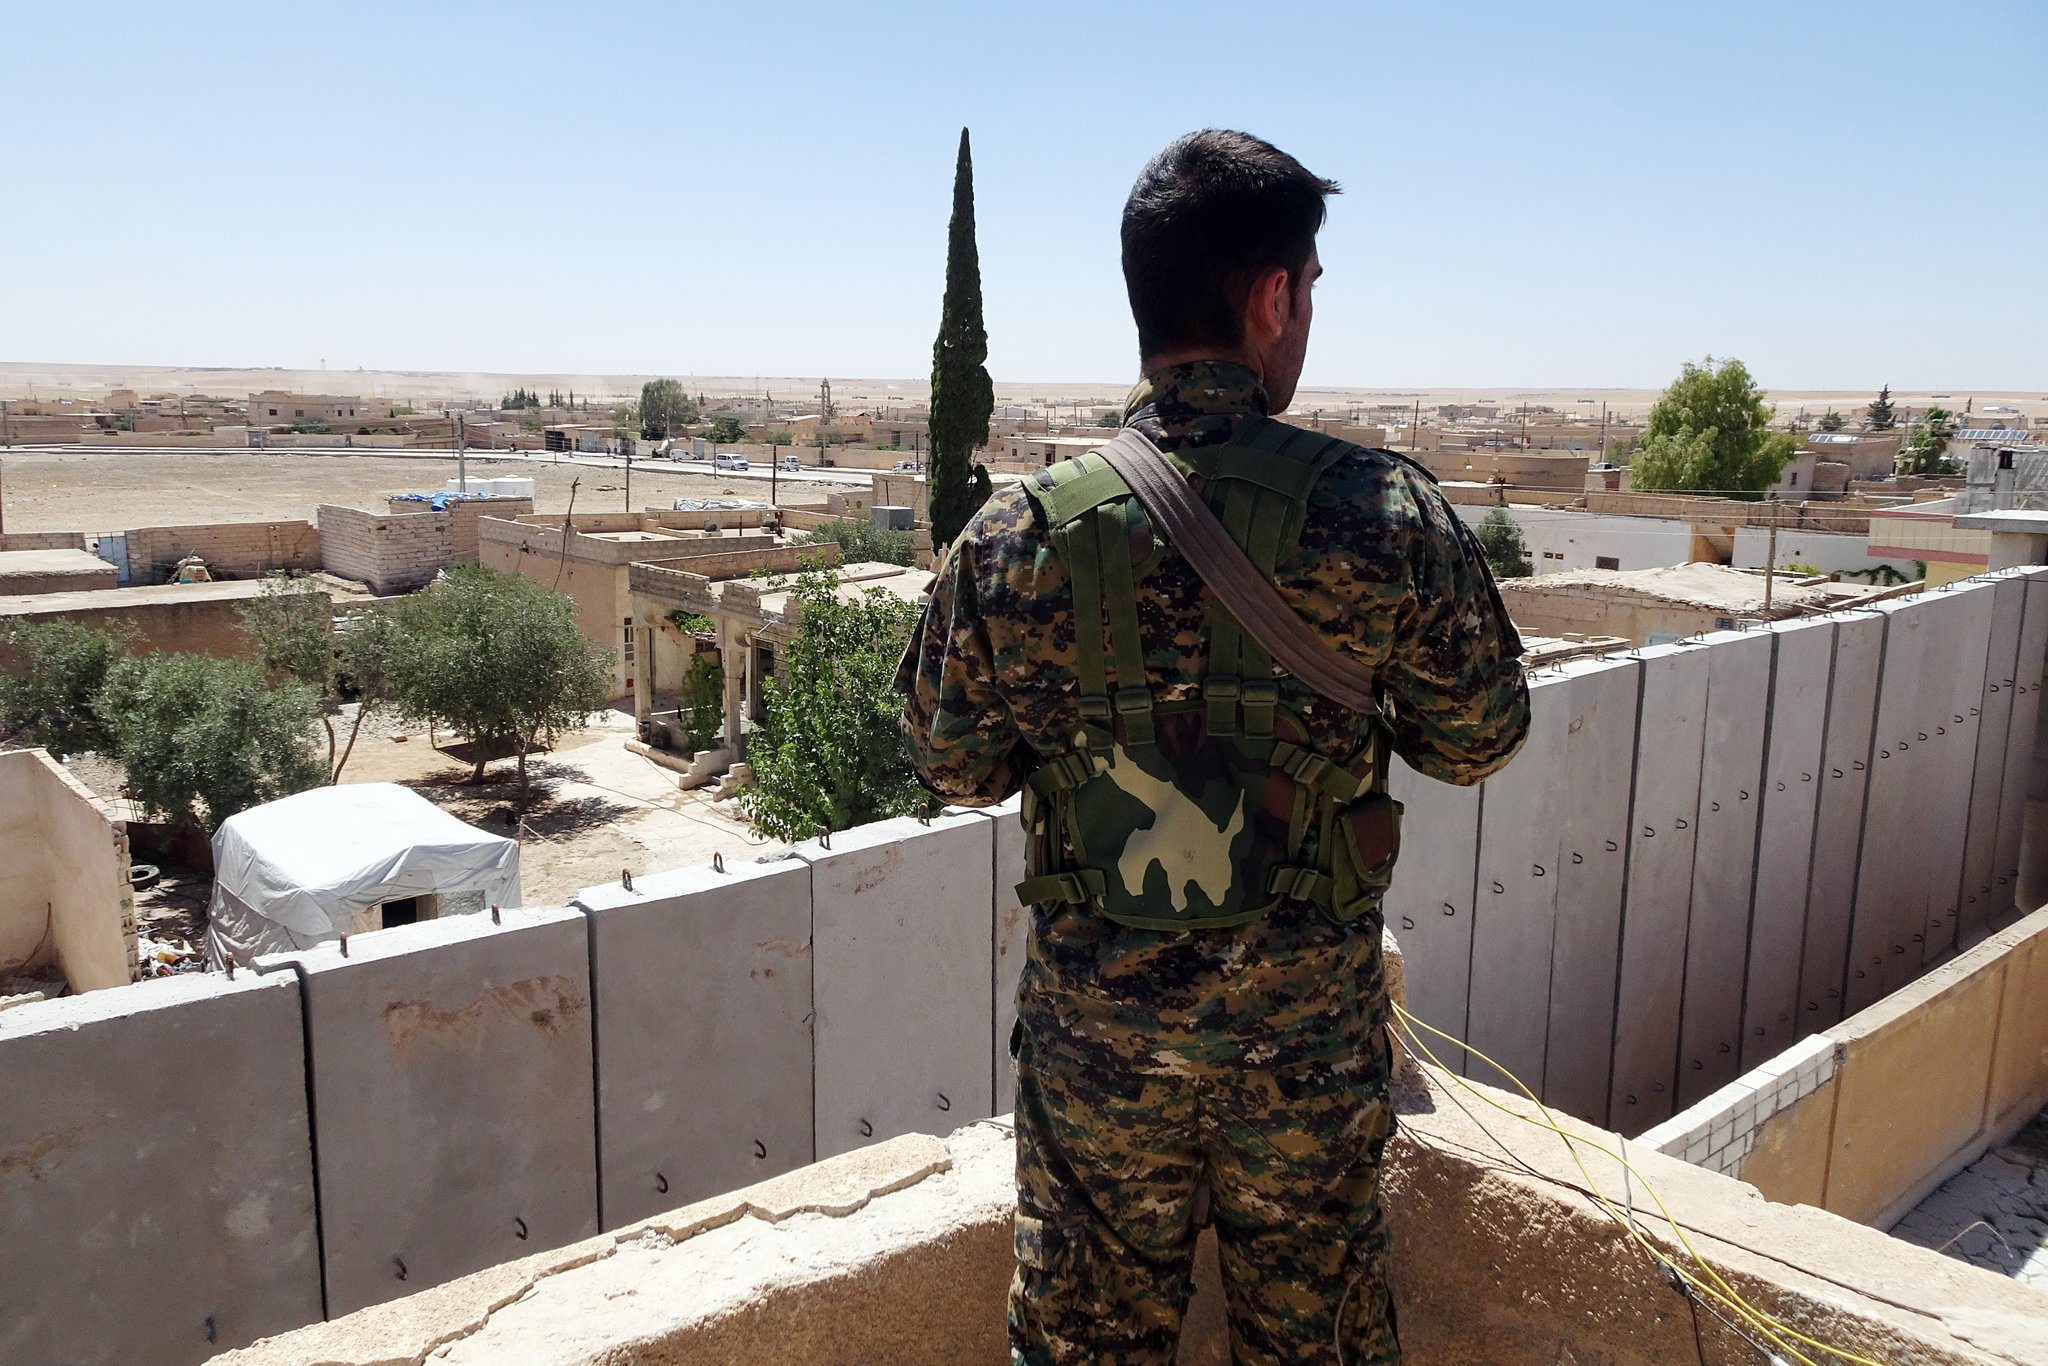 As ISIS Fighters Fill Prisons in Syria, Their Home Nations Look Away